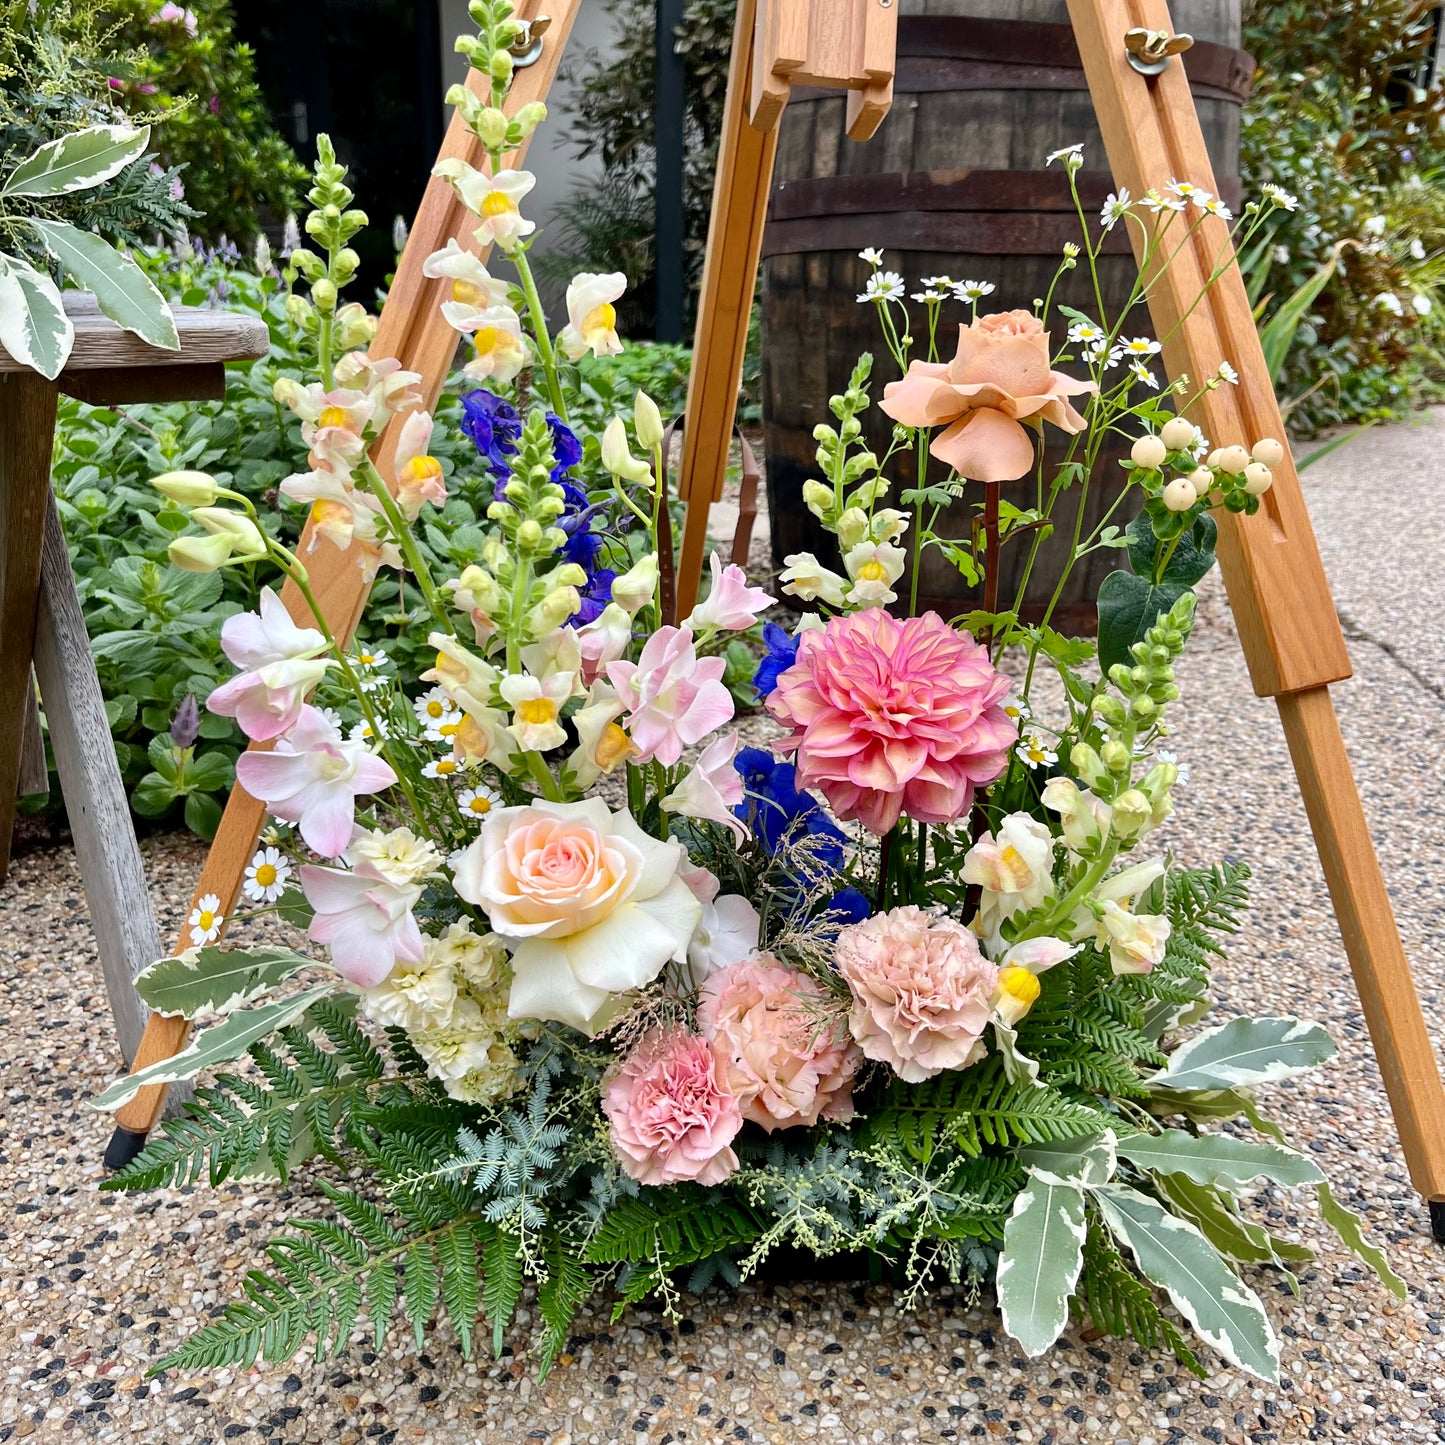 Stunning floral centerpieces for your wedding or event tables.